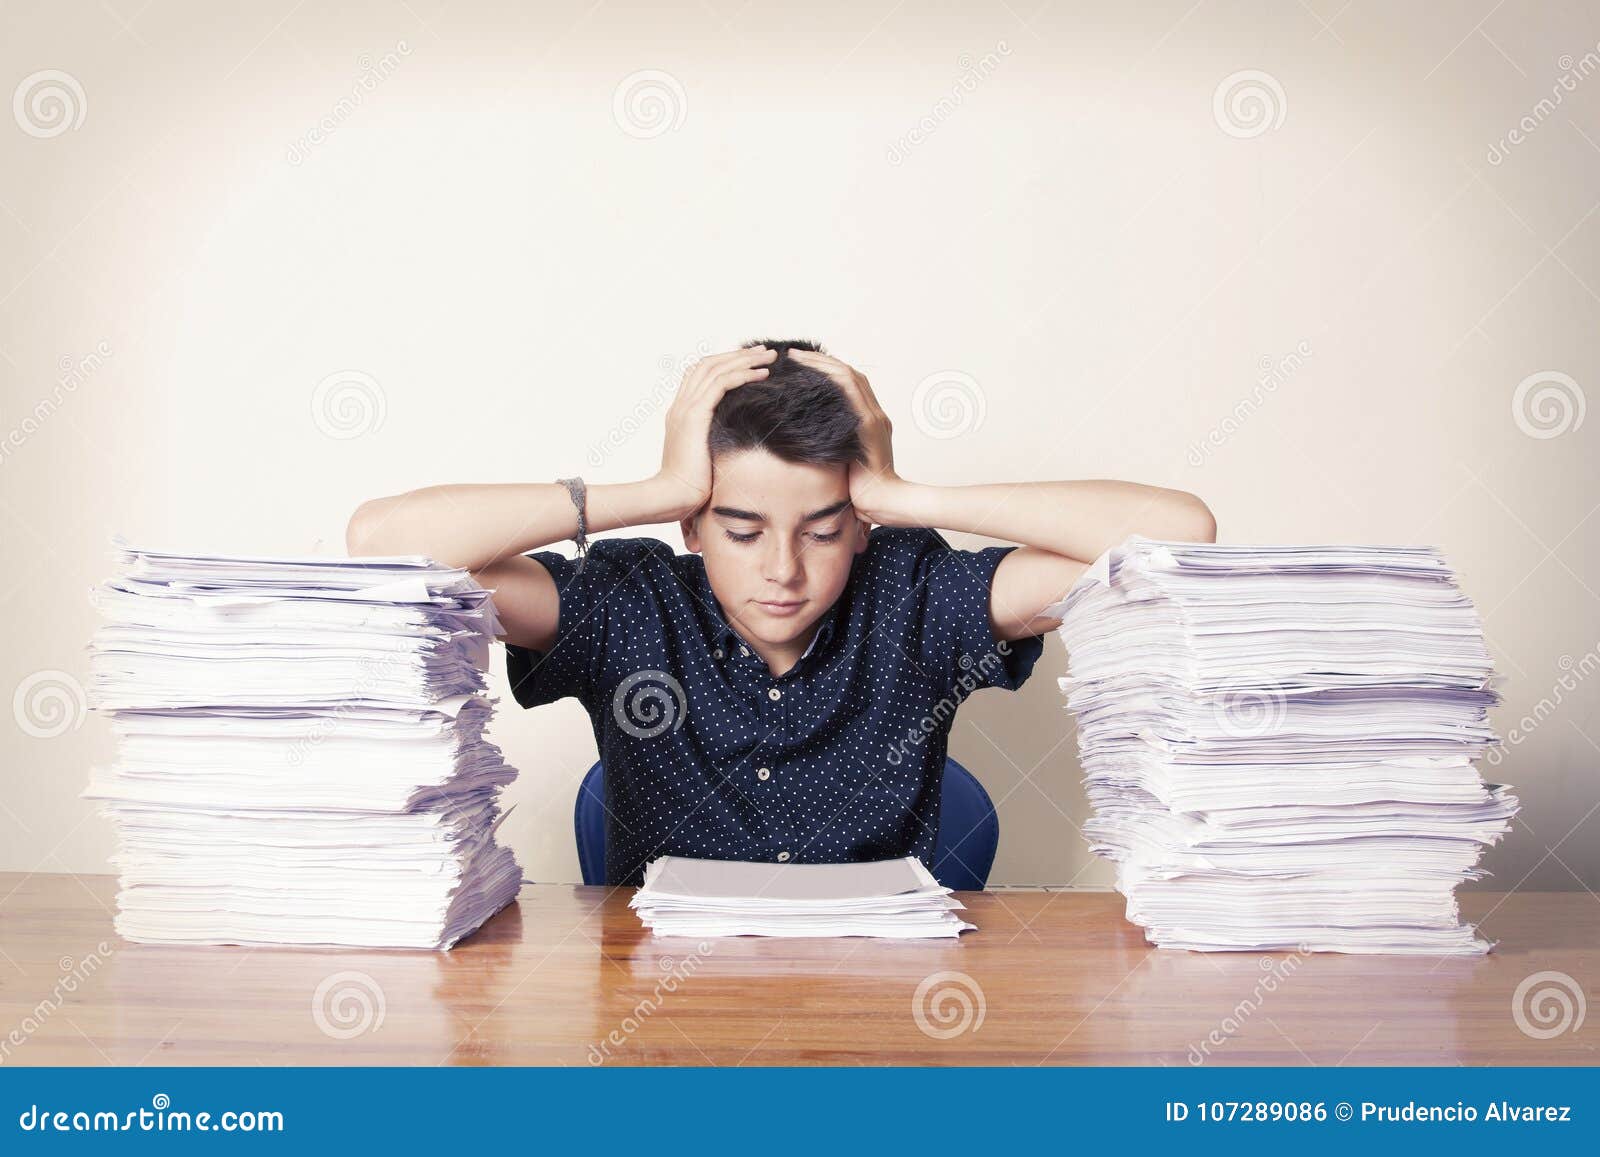 Young Boy With Piles Of Papers Stock Photo Image Of Desk